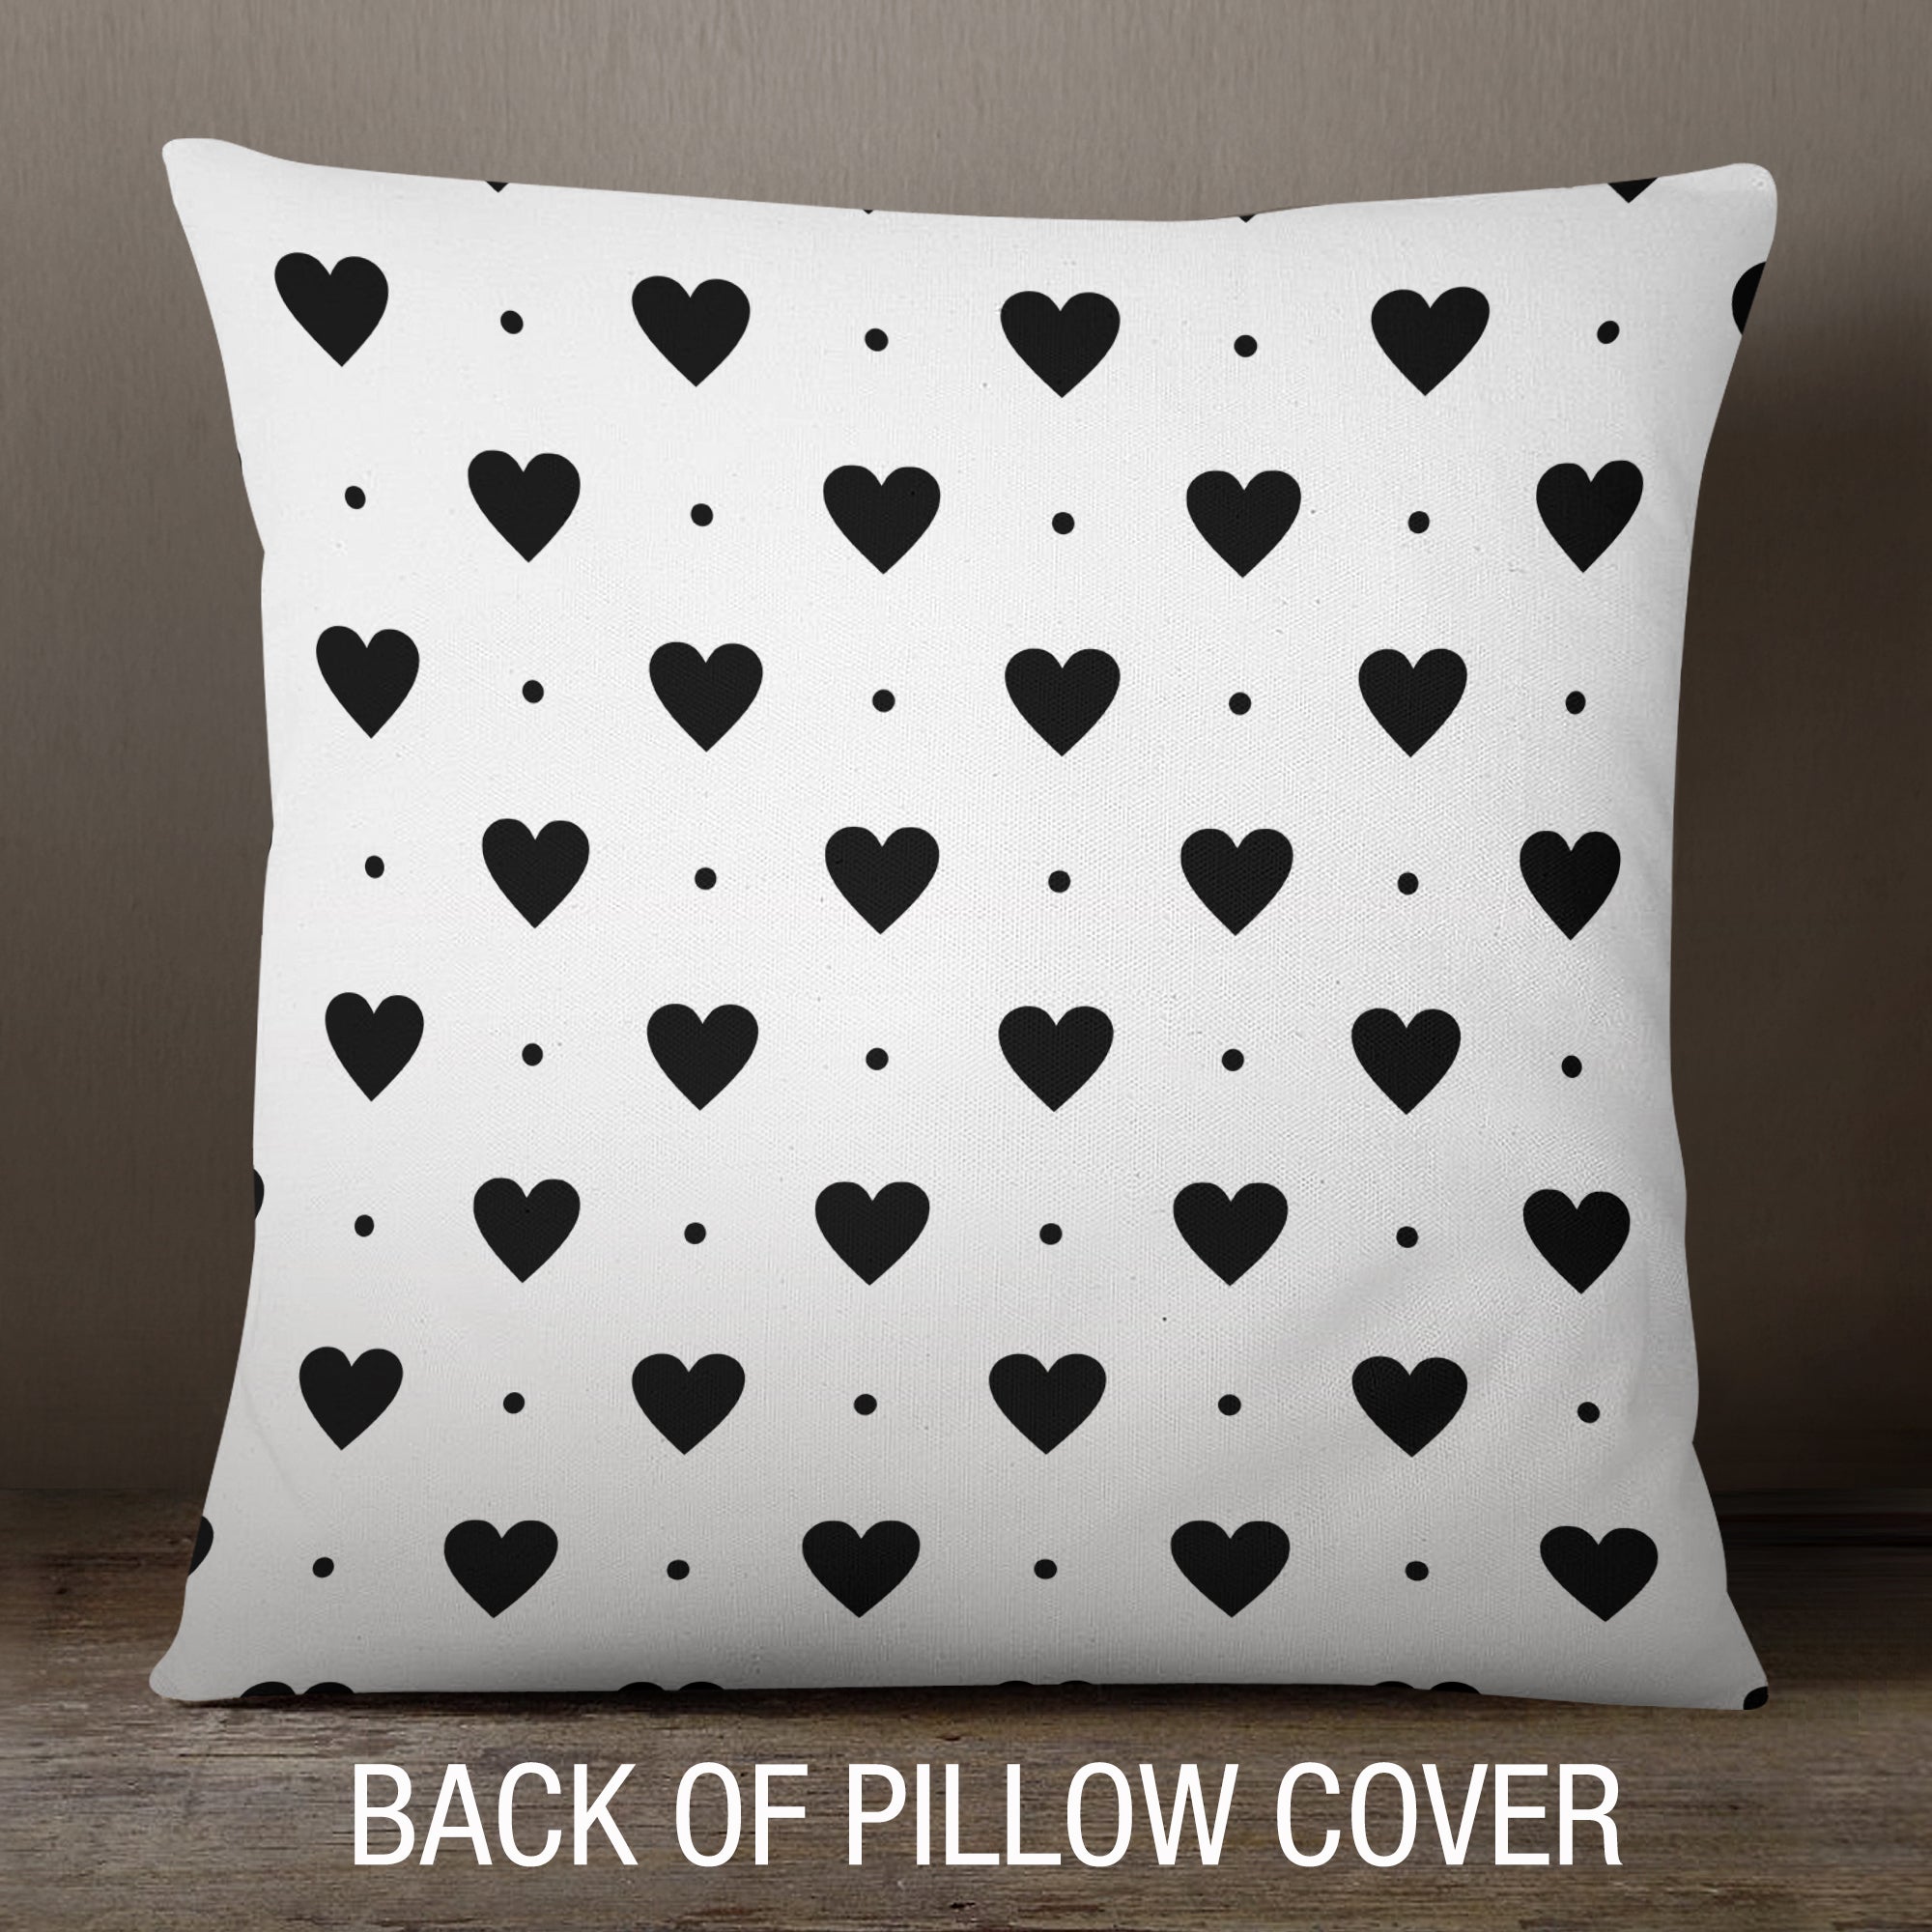 Fan Motif White & Black Quilted Pillow Cover, 18x18